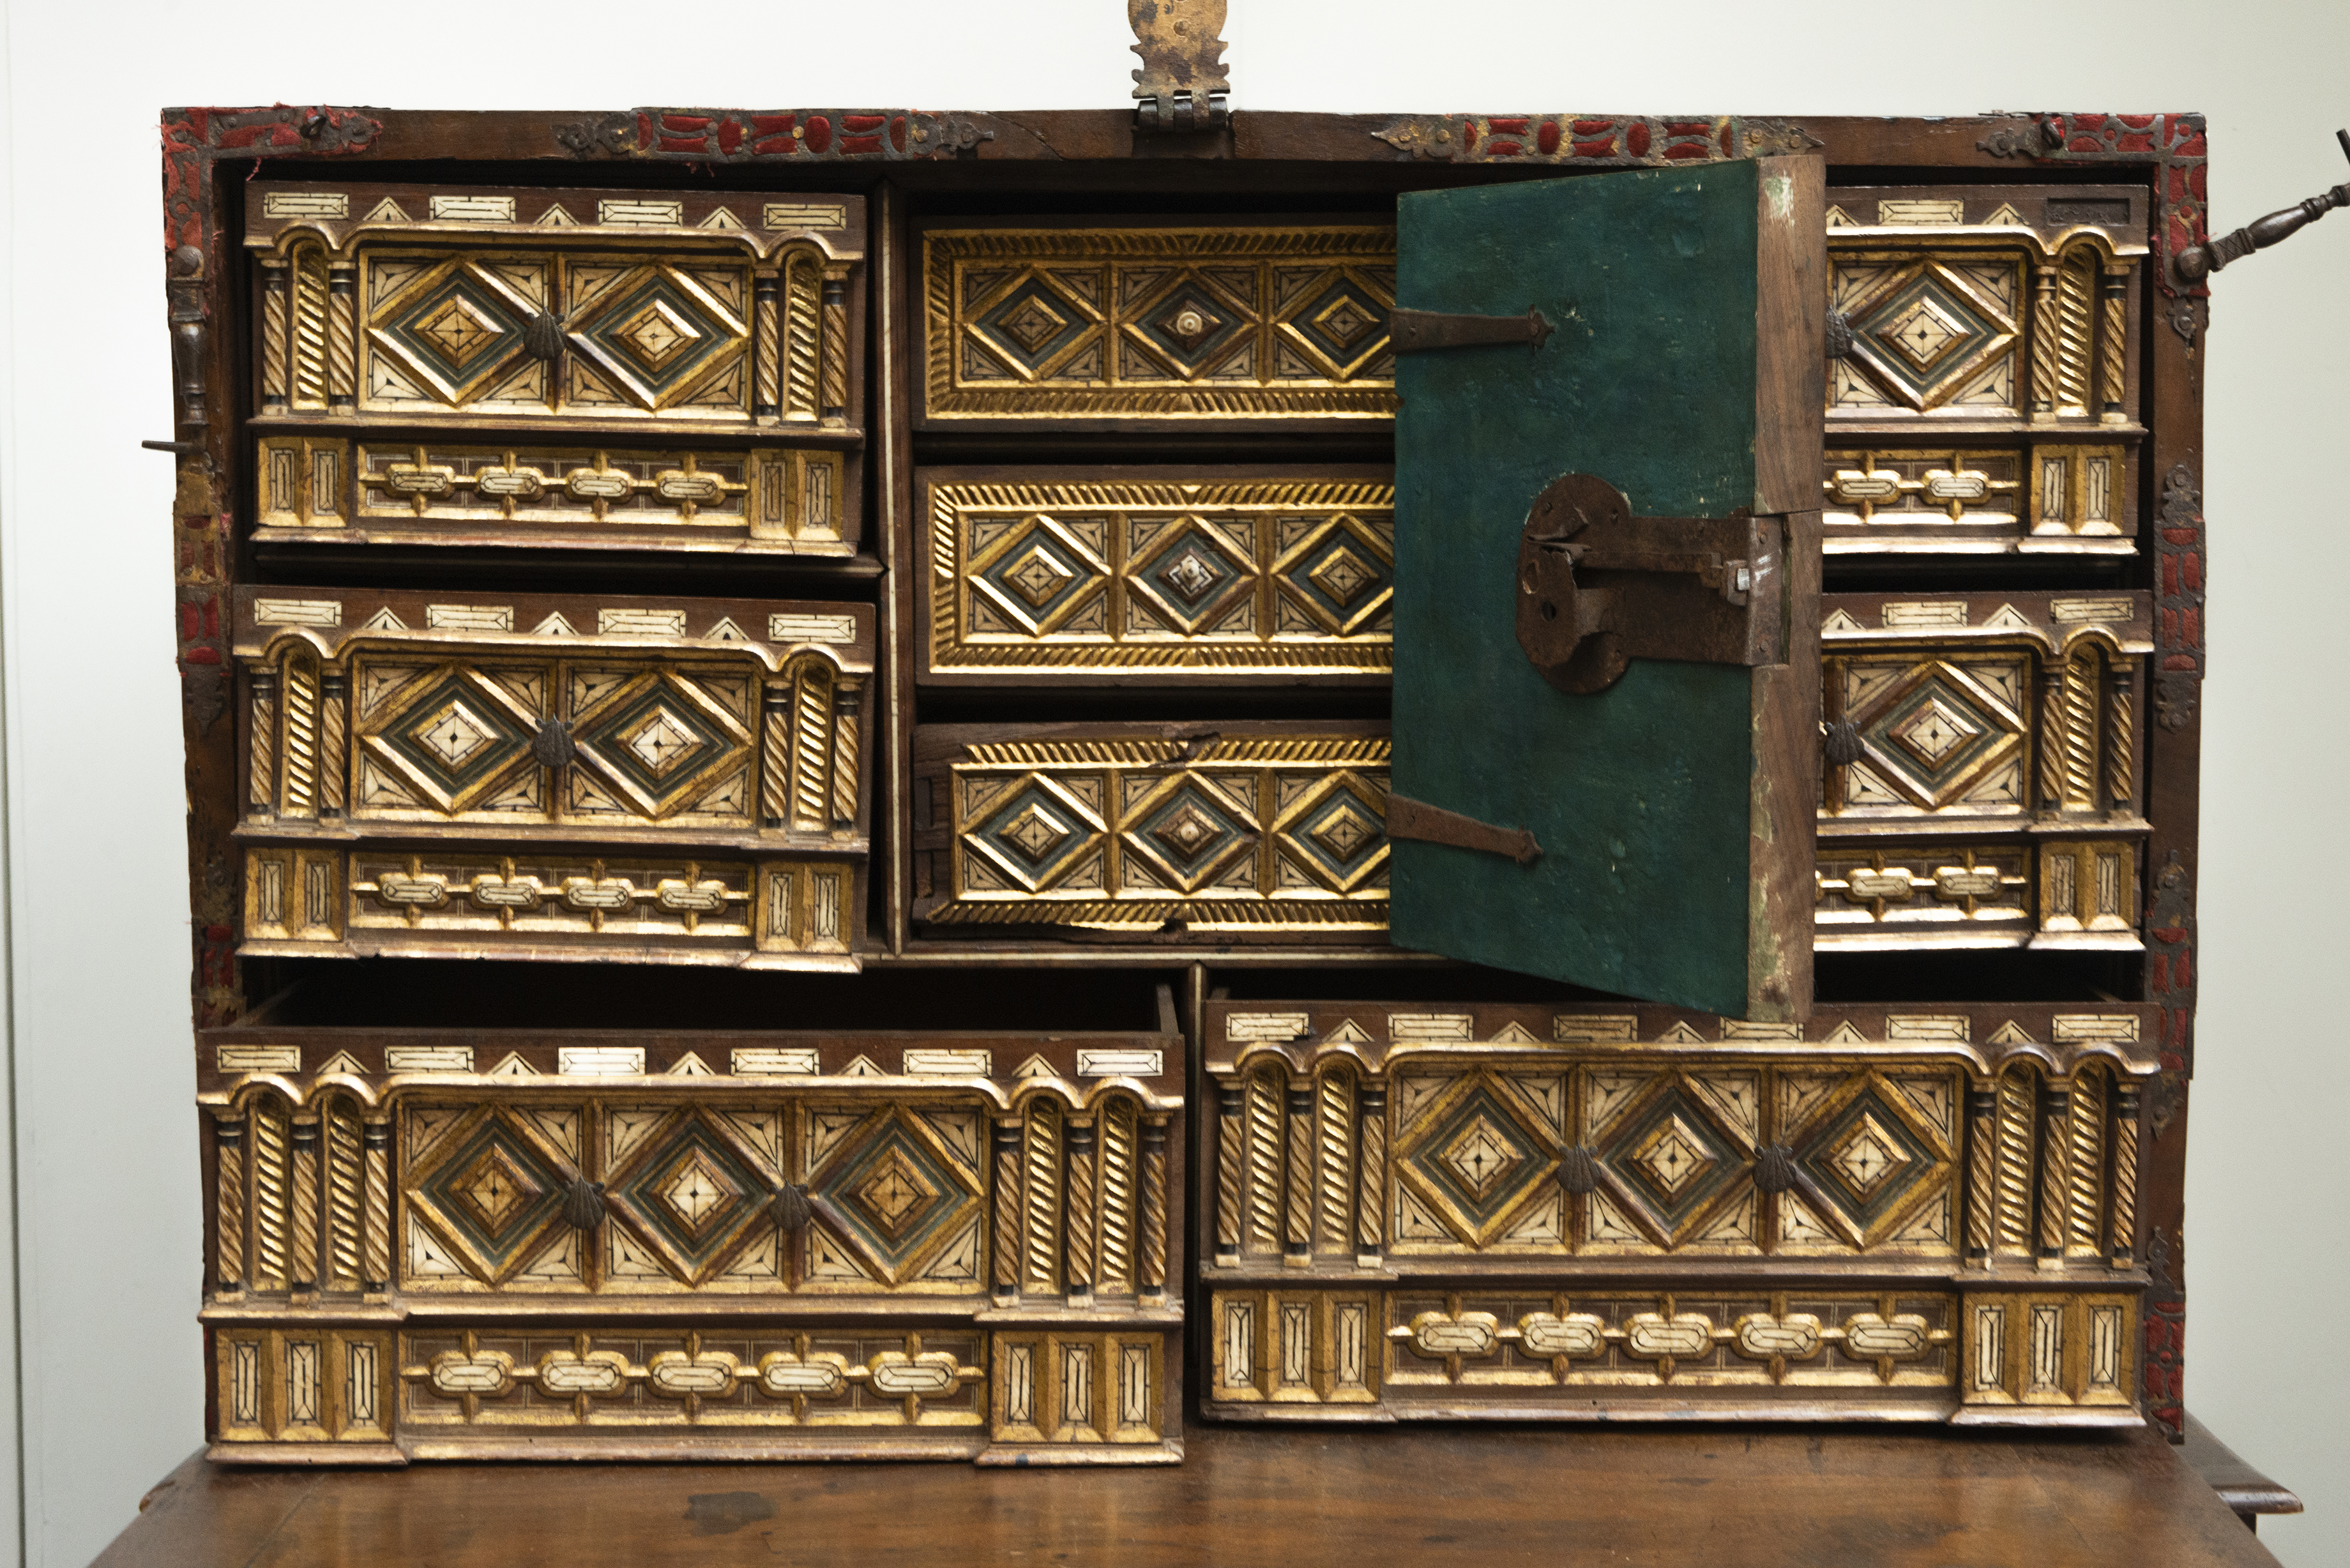 Renaissance Vargas "Bargueño" type chest cabinet with period table, 16th century - Image 4 of 8